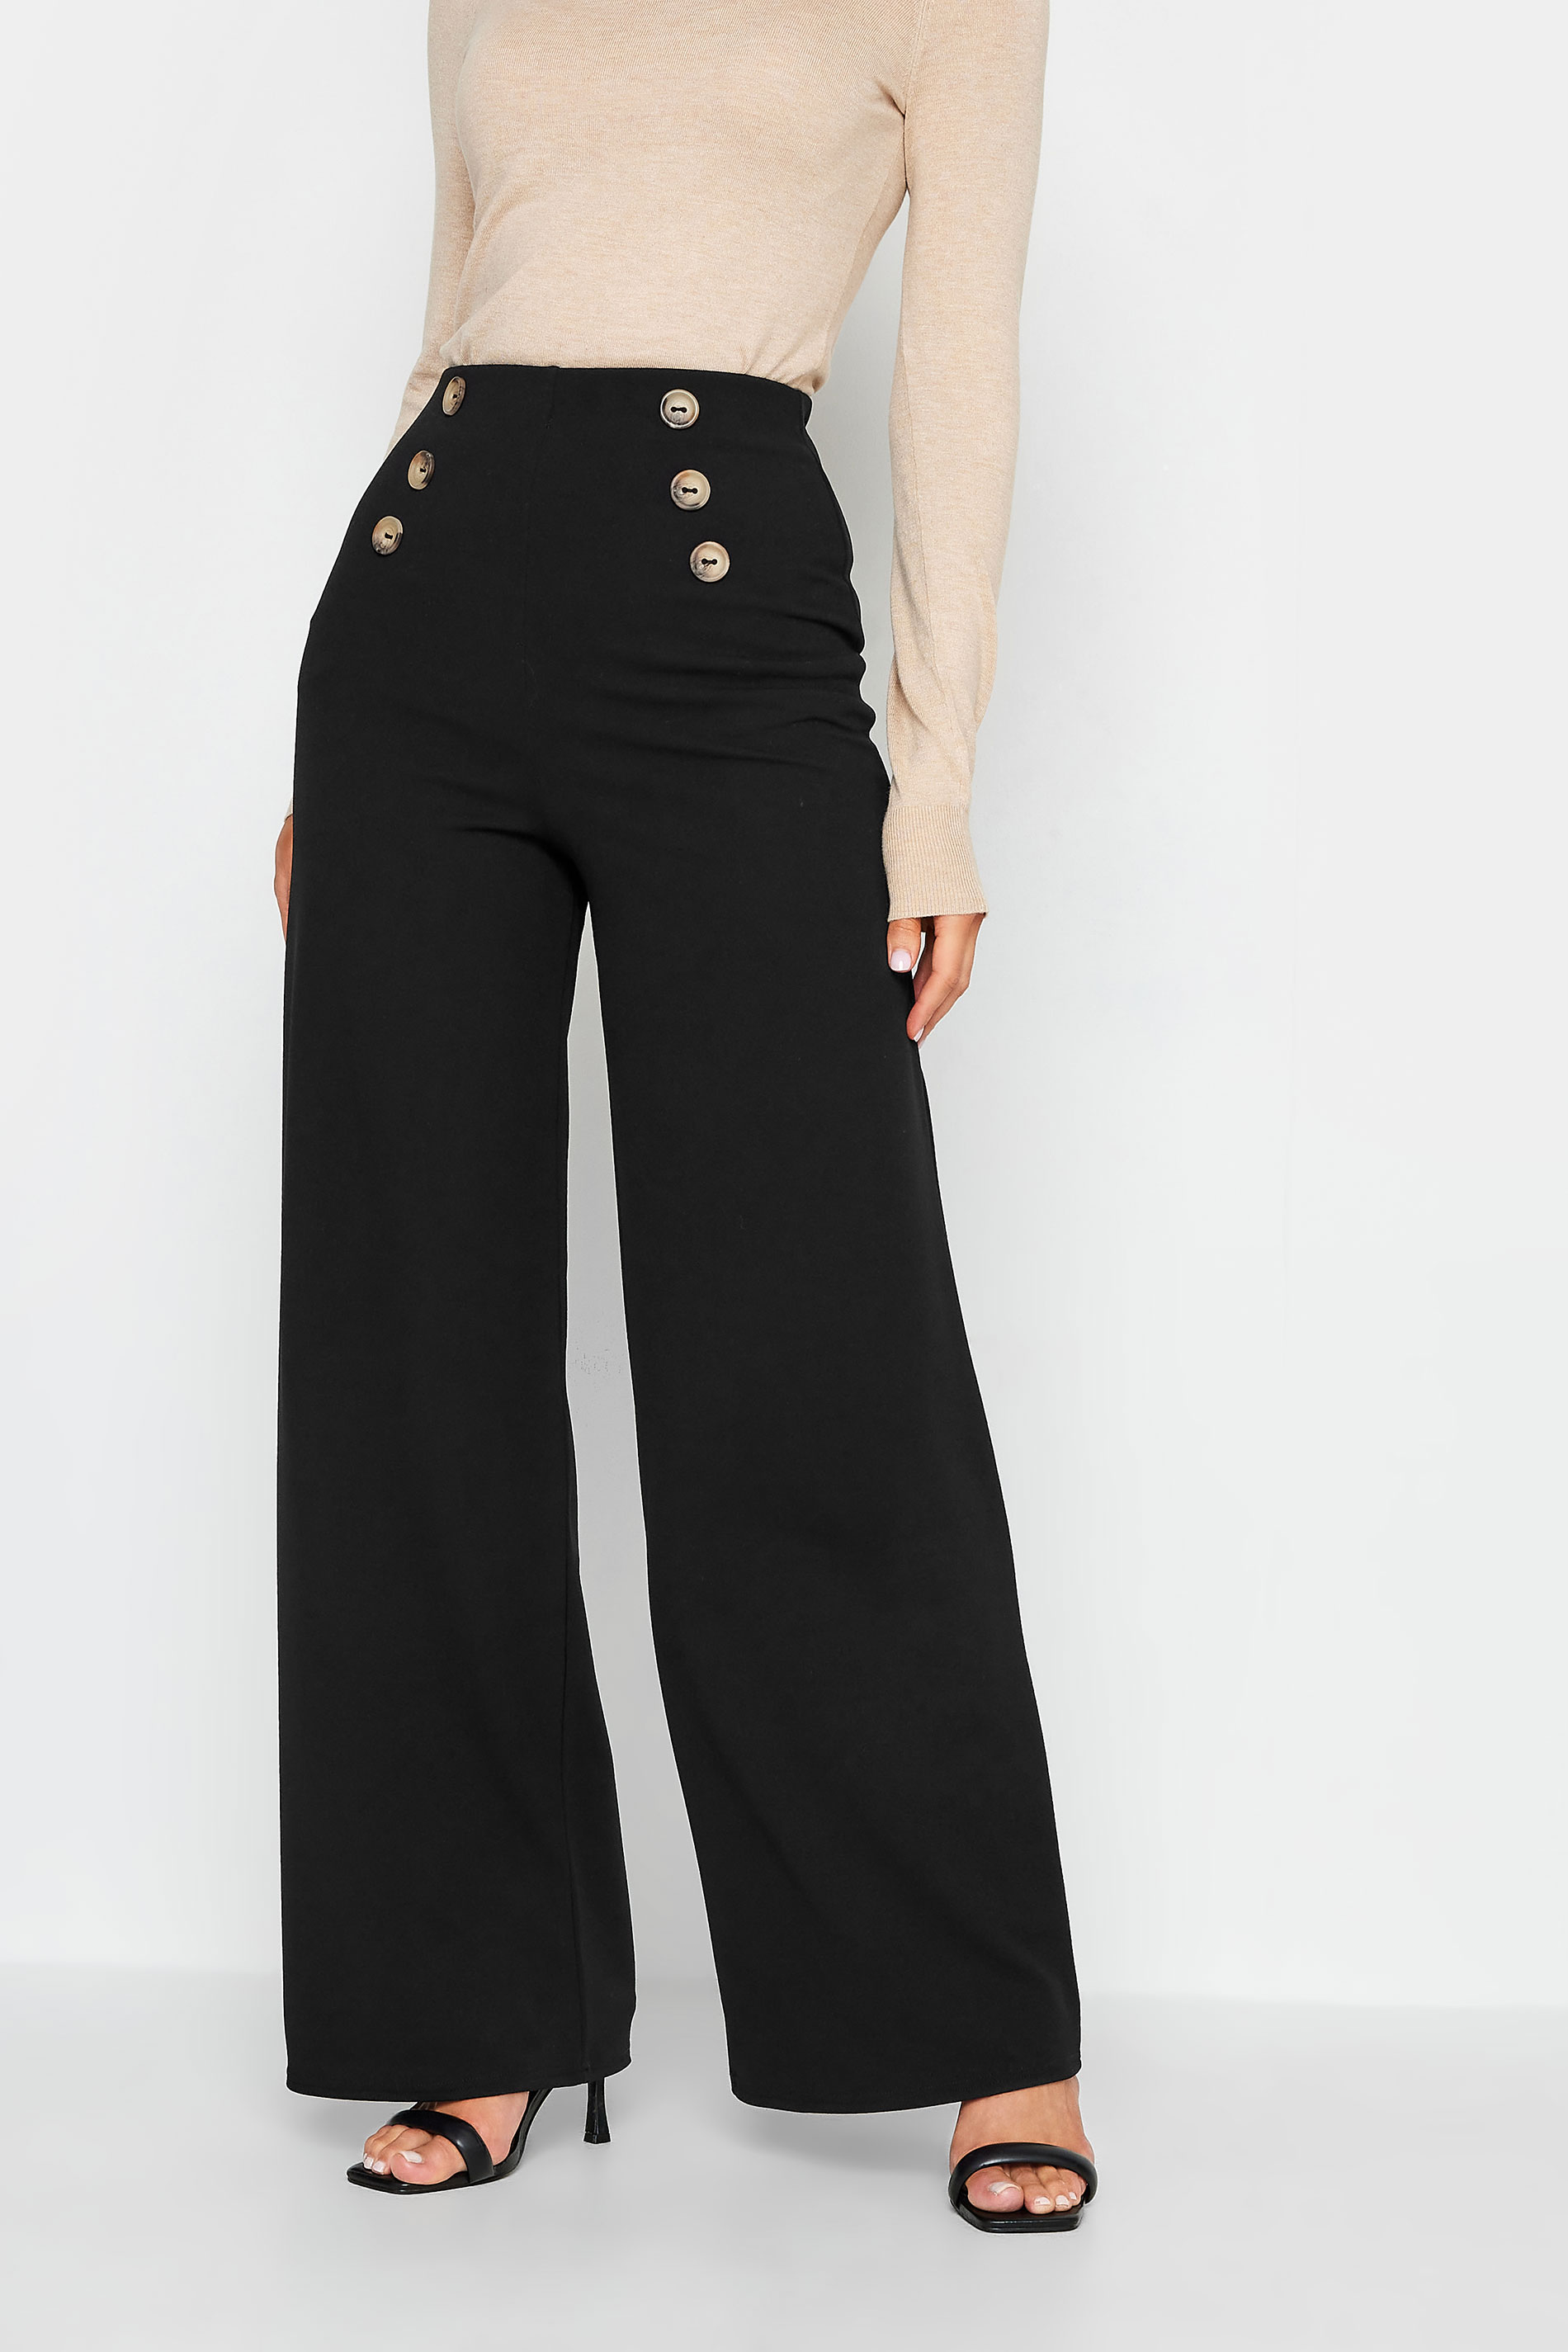 BUTTON TROUSERS - Eco-Conscious Style | SHIO, BERLIN